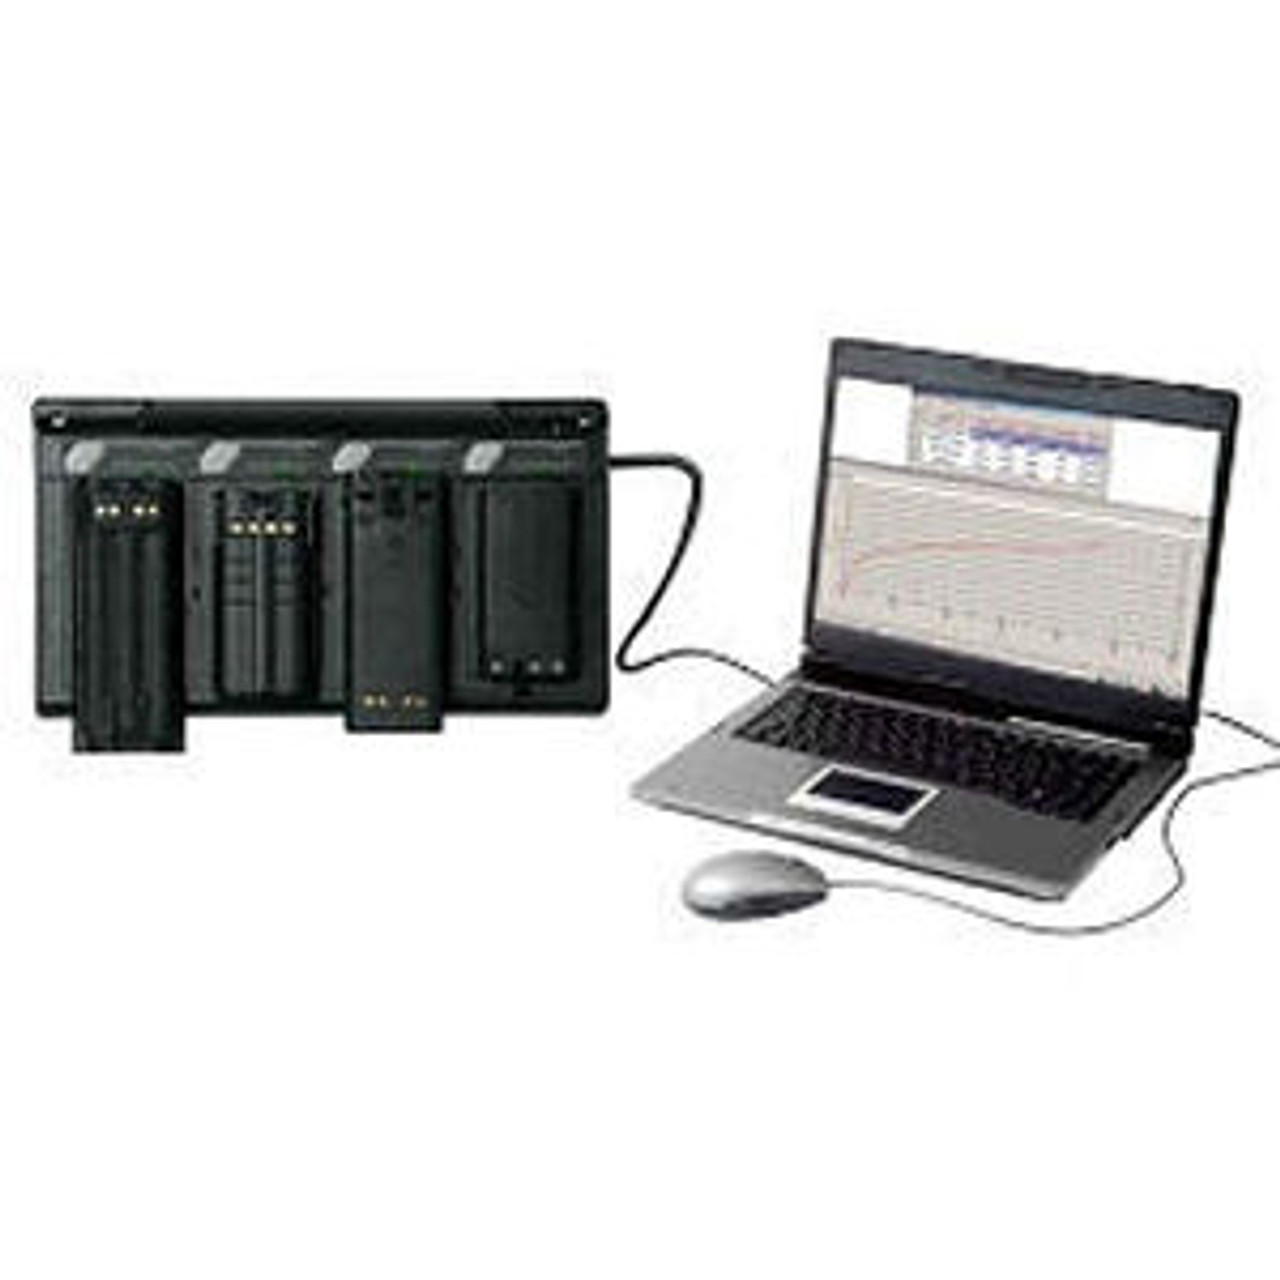 AdvanceTec 4-Slot Software Driven Monitoring System For Kenwood NX-411 Batteries